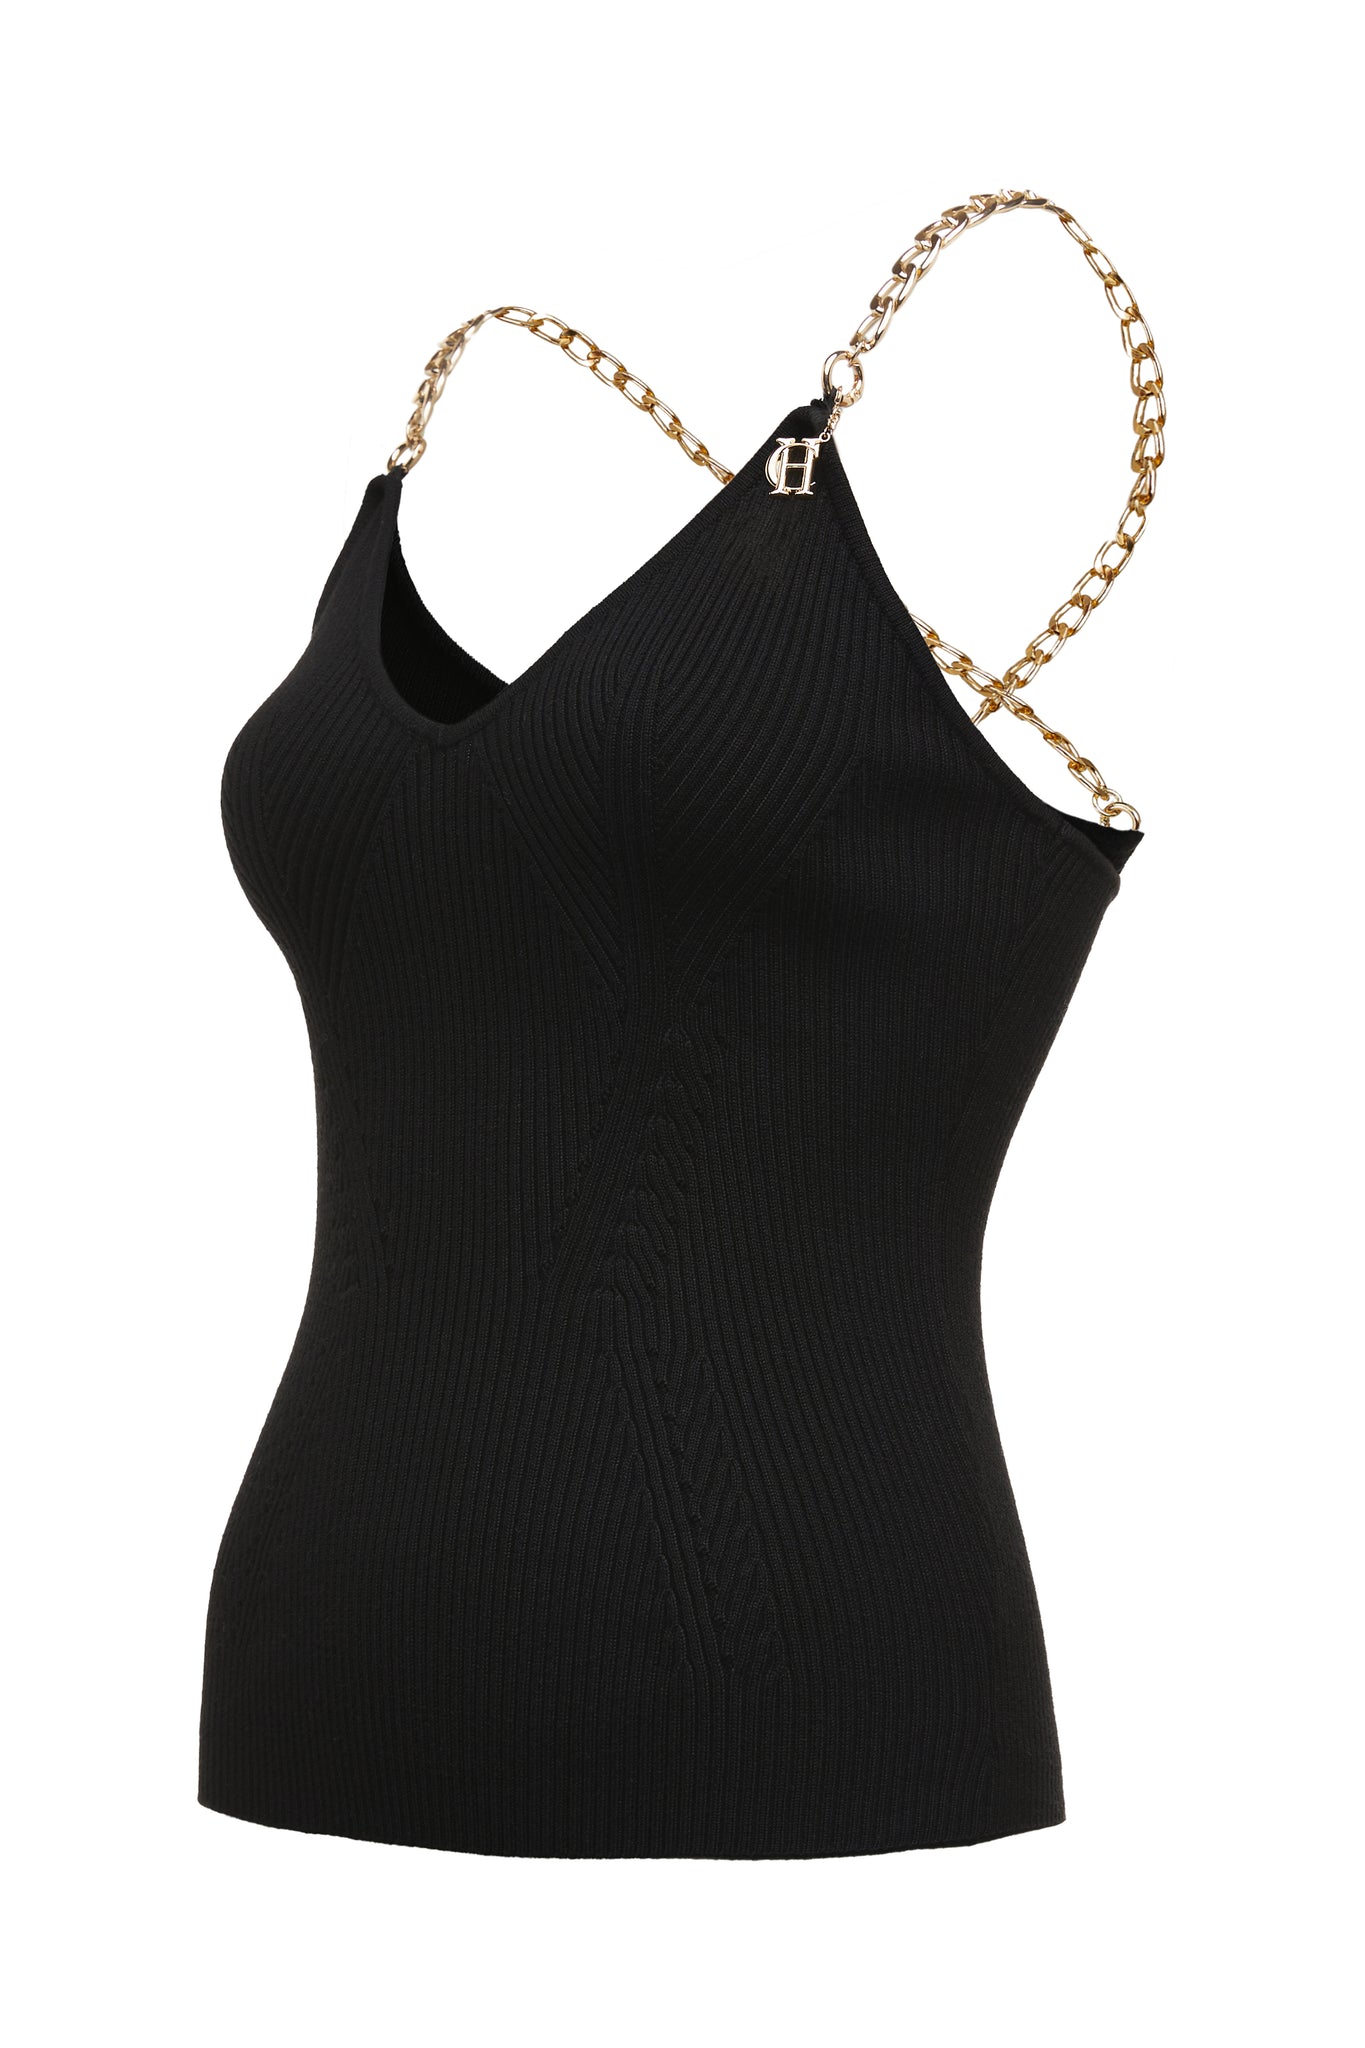 Side view of black knitted vest top with crossover gold chain straps detailed with small hc charm and v-neckline